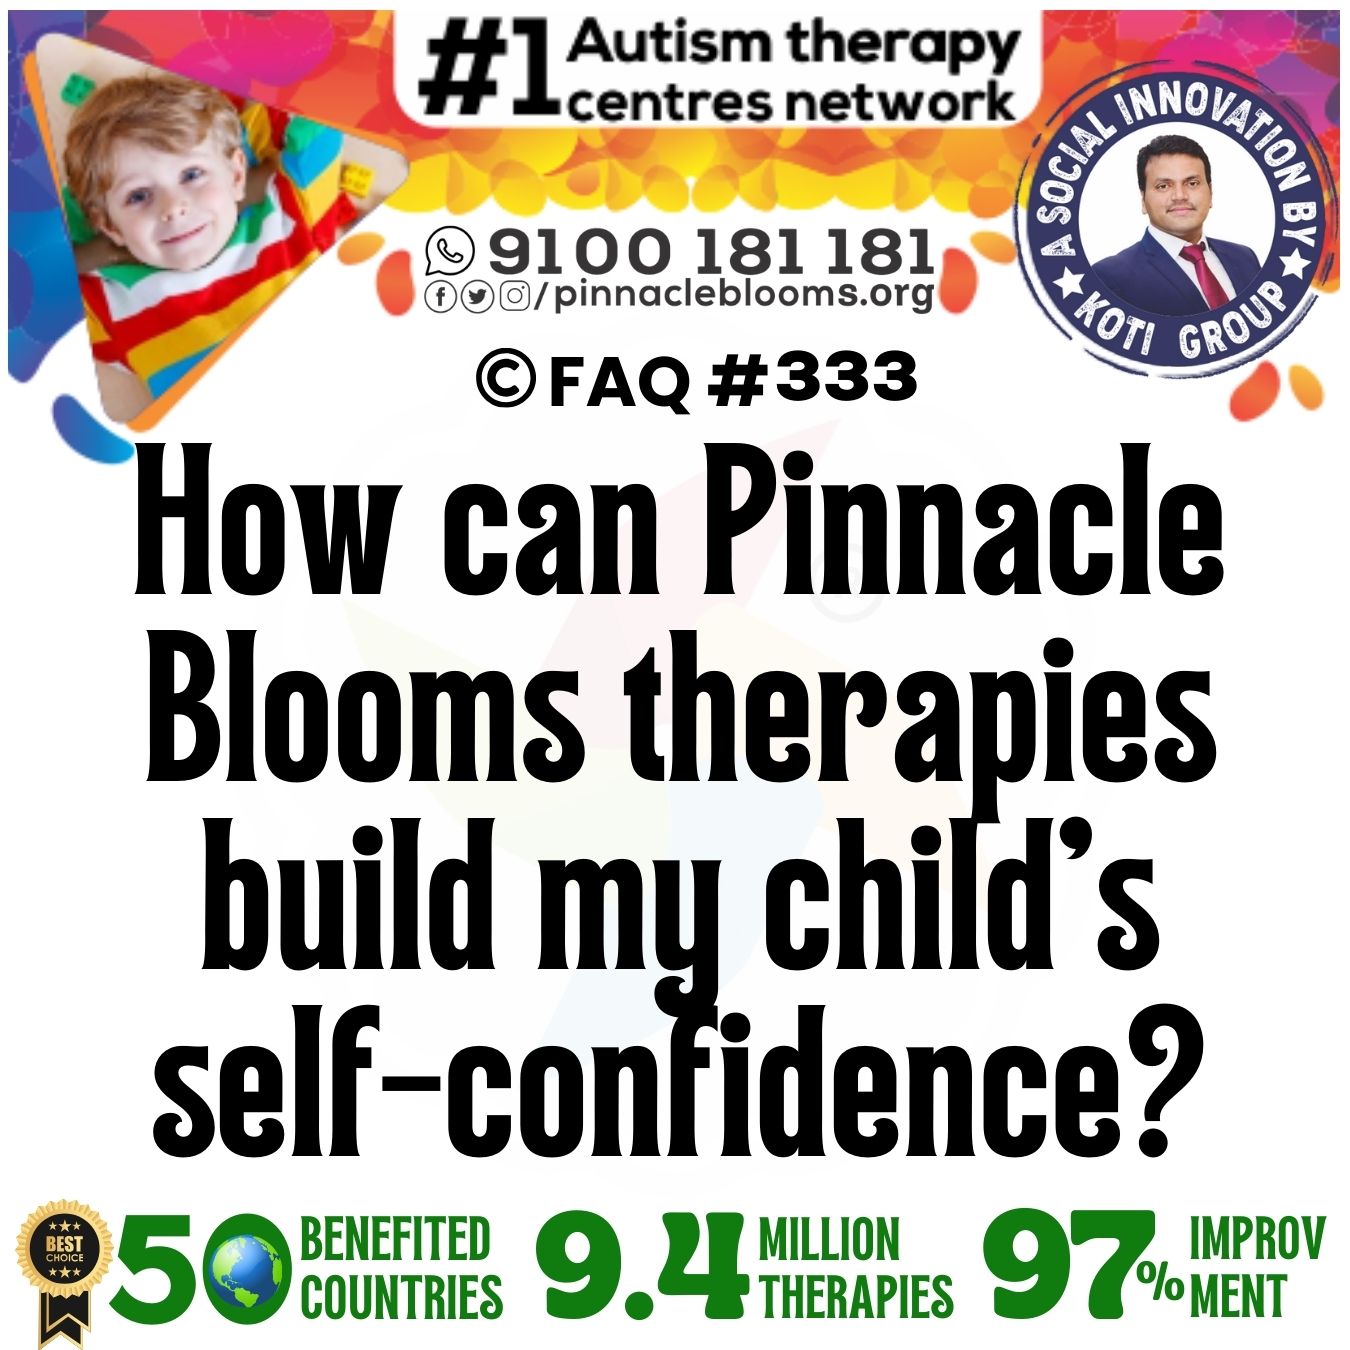 How can Pinnacle Blooms therapies build my child's self-confidence?